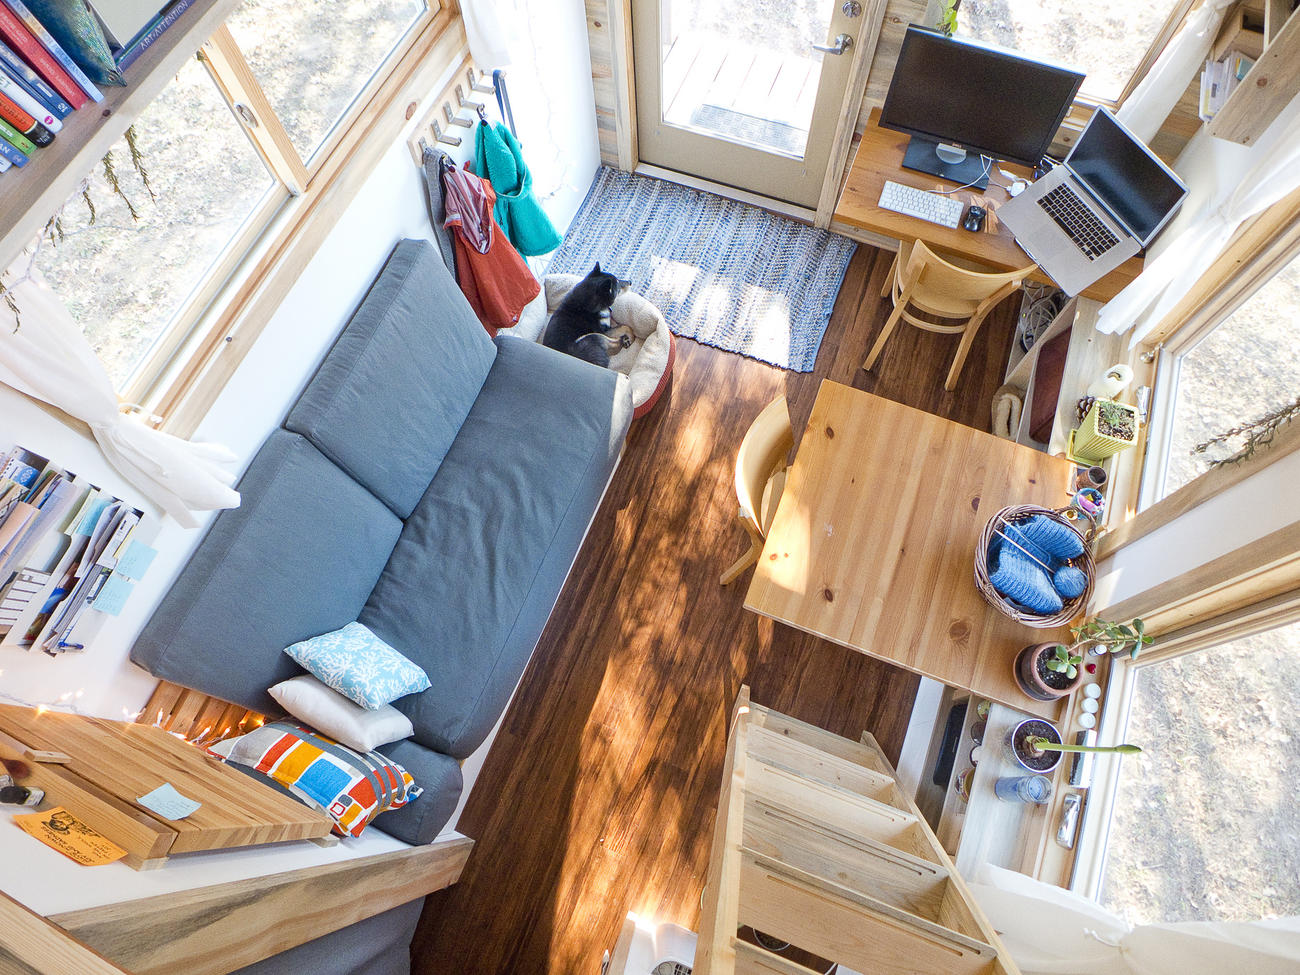 What it’s really like to live in a tiny house